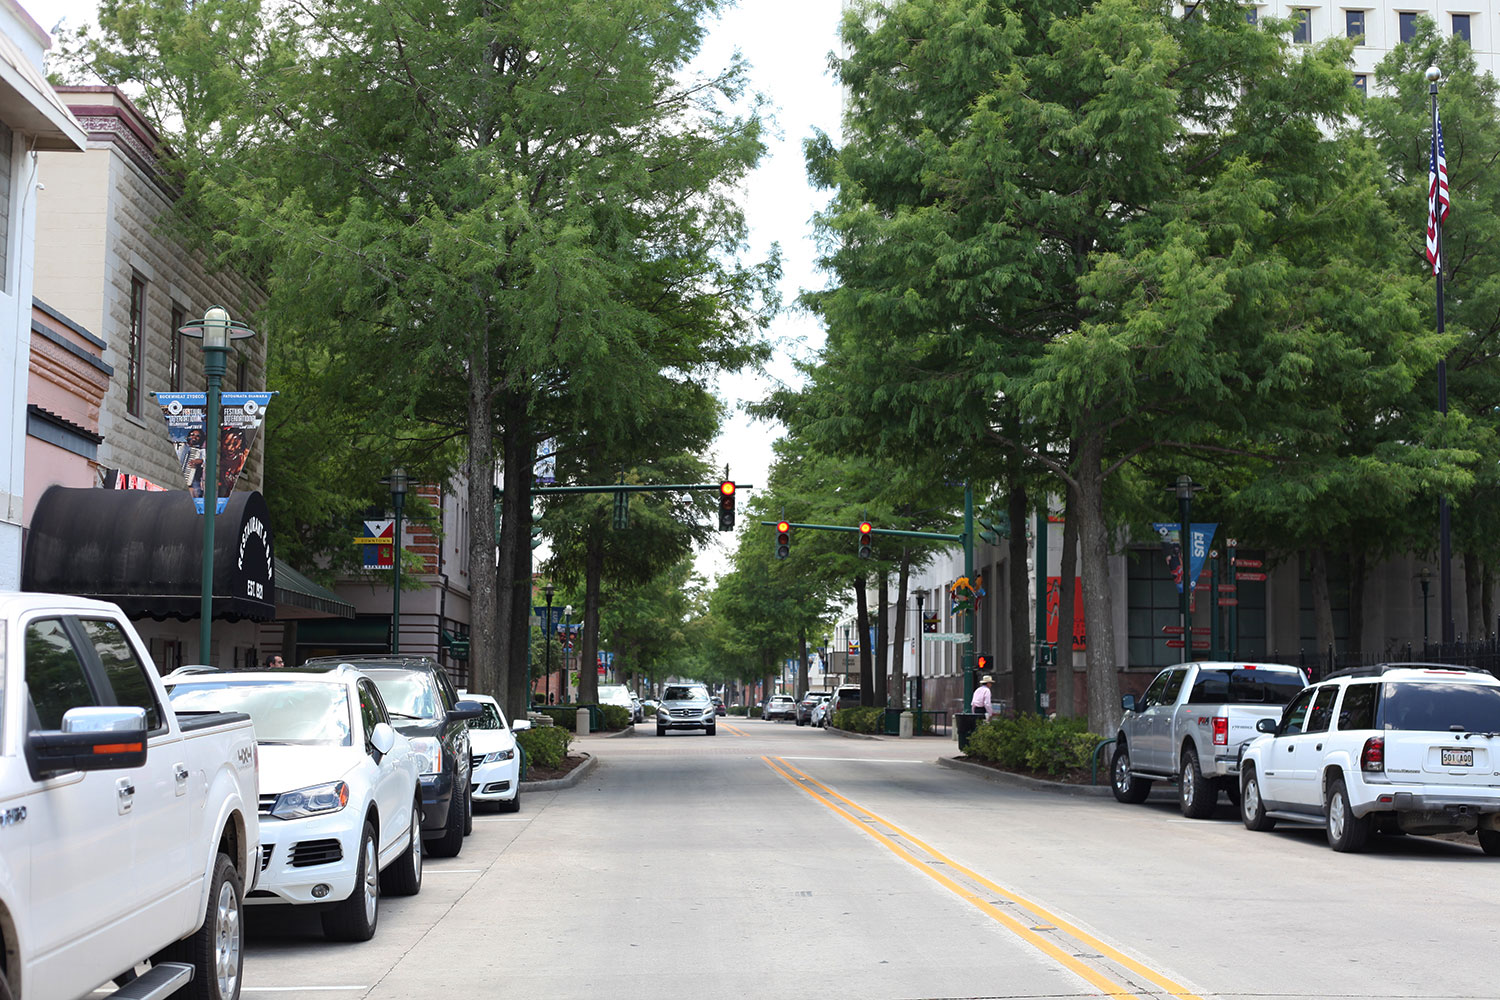 Downtown Lafayette is home to The Perret Group